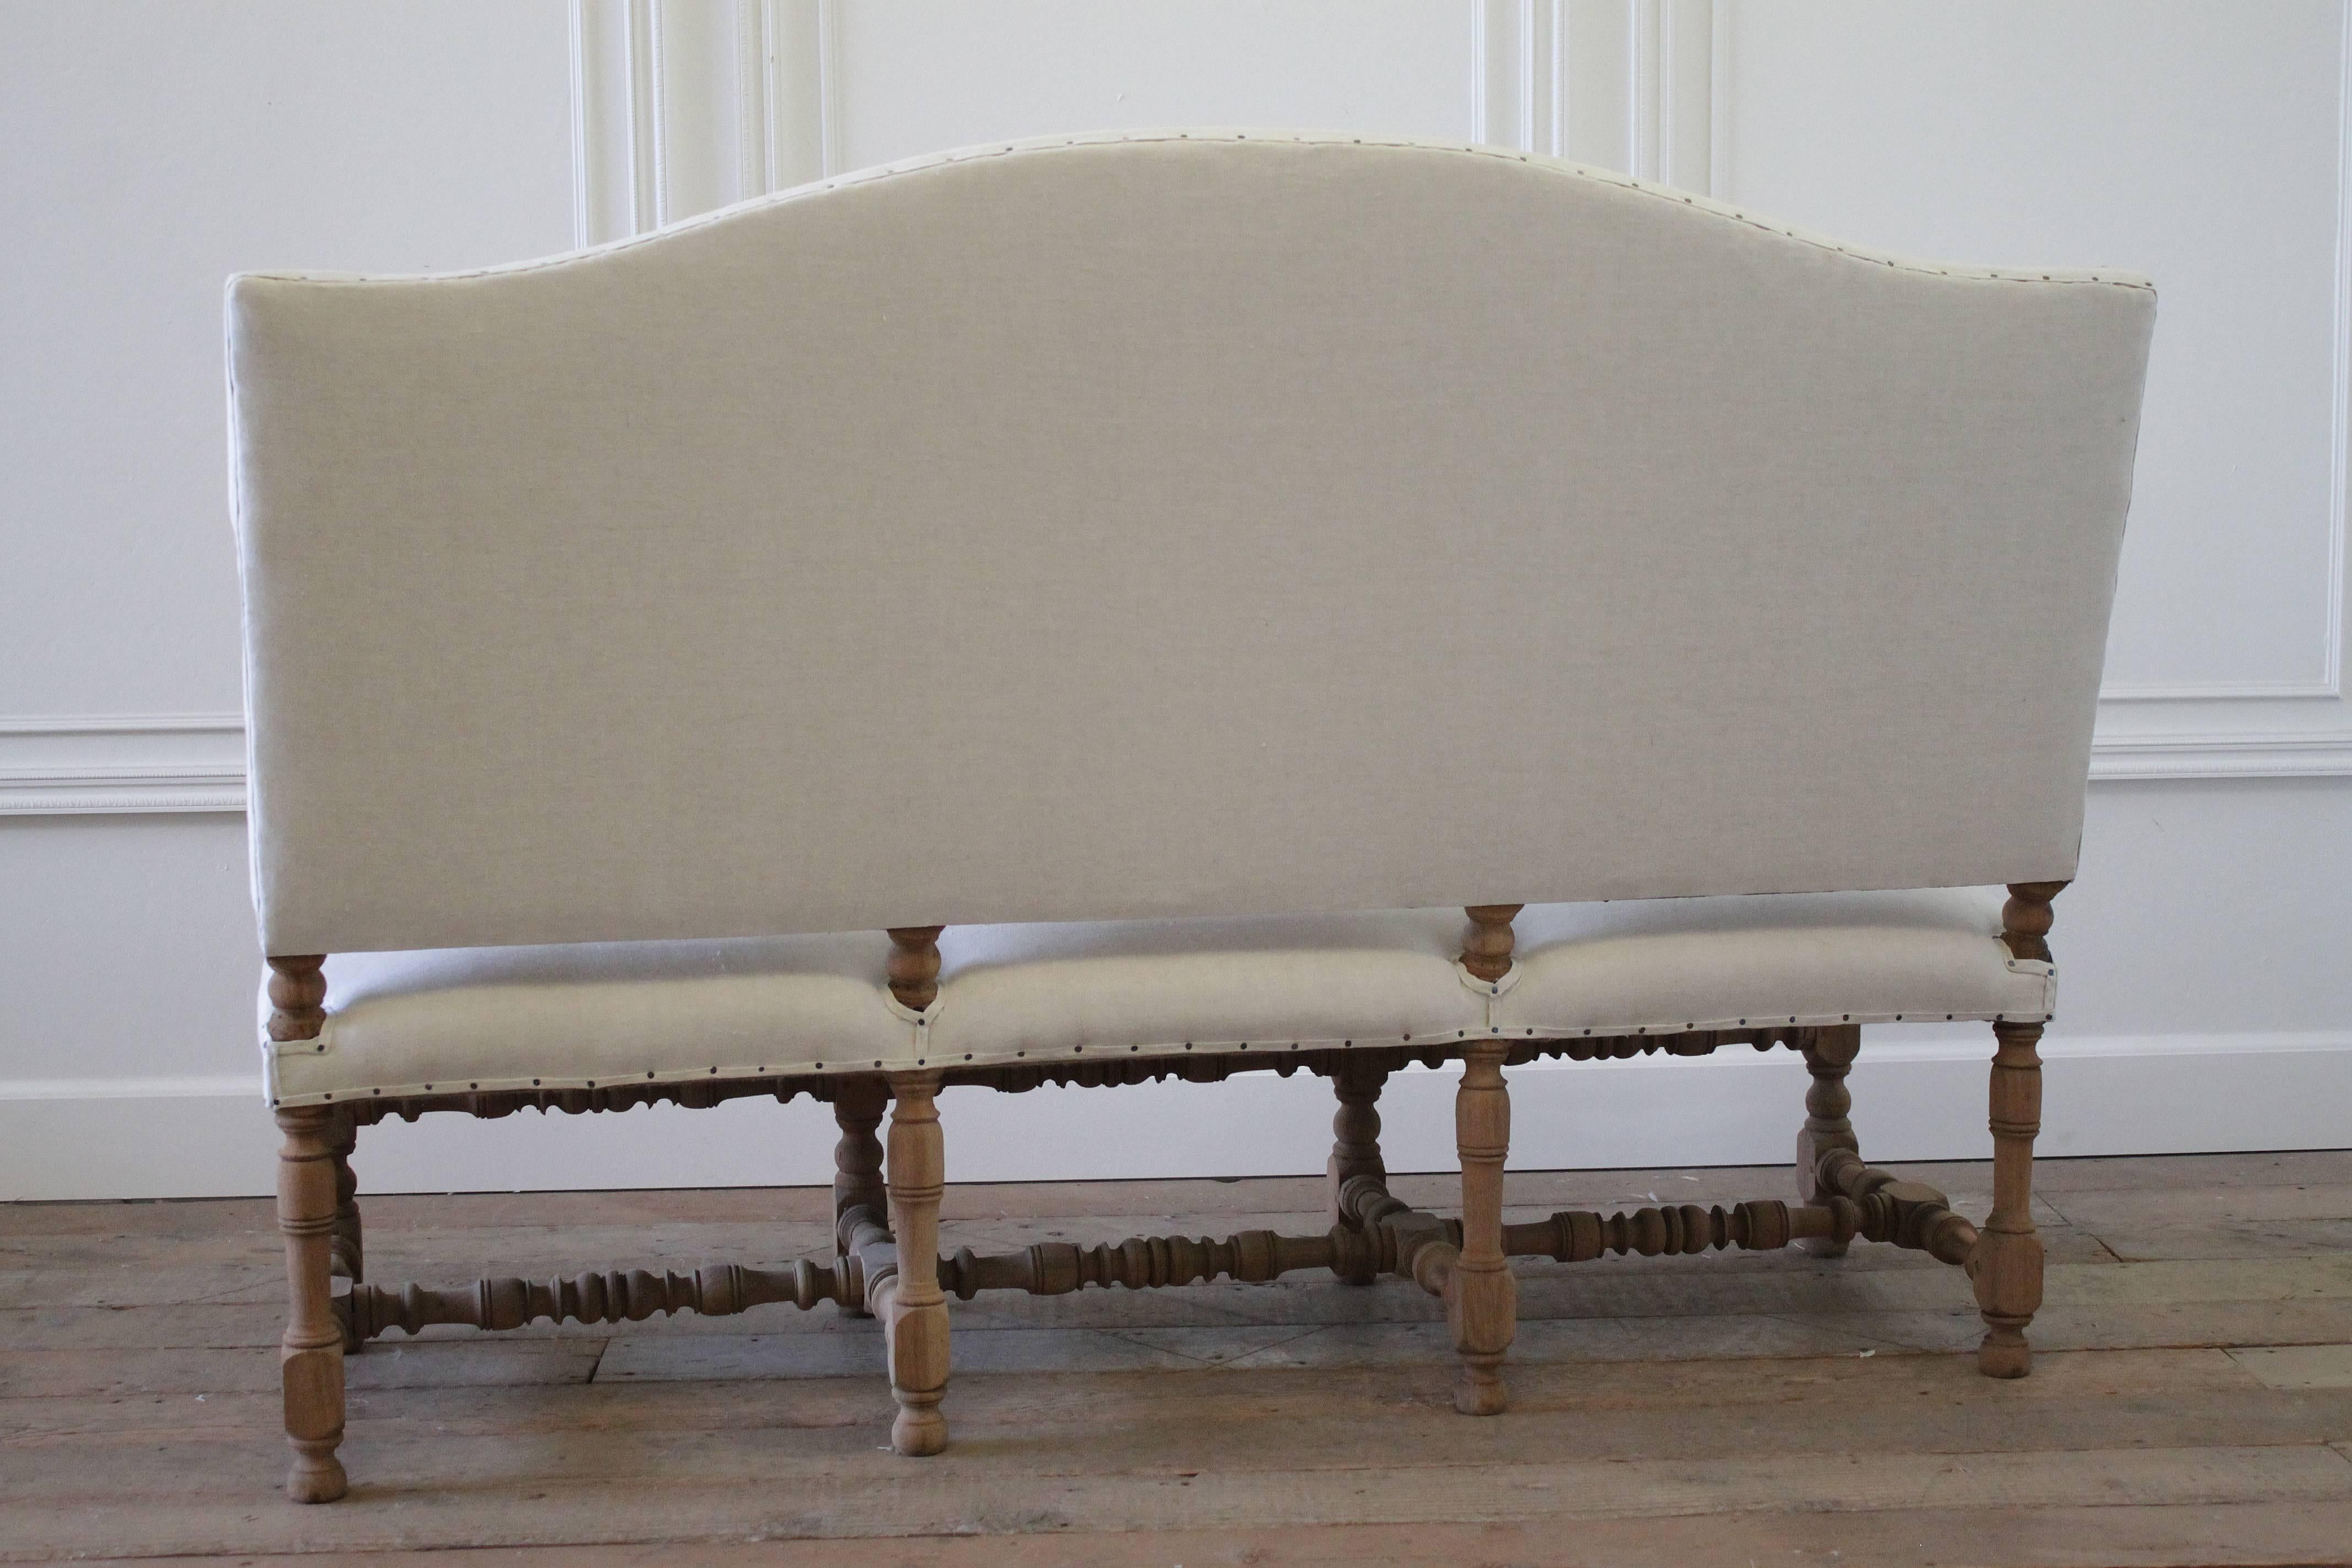 20th Century Antique Settee Bench Upholstered in Organic Natural Linen with Nail Trim